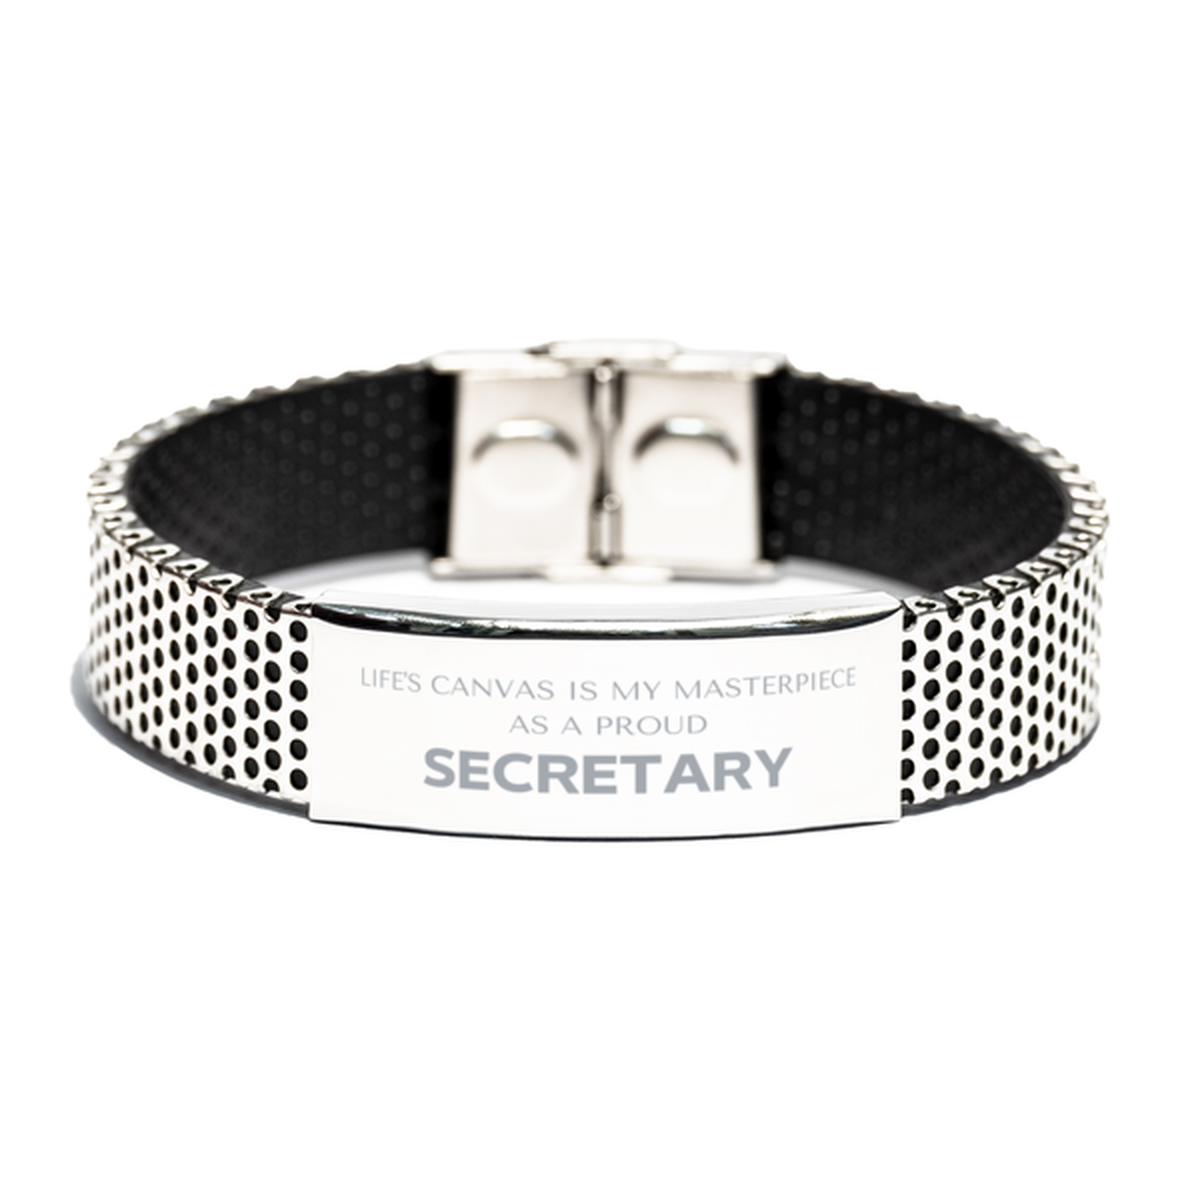 Proud Secretary Gifts, Life's canvas is my masterpiece, Epic Birthday Christmas Unique Stainless Steel Bracelet For Secretary, Coworkers, Men, Women, Friends